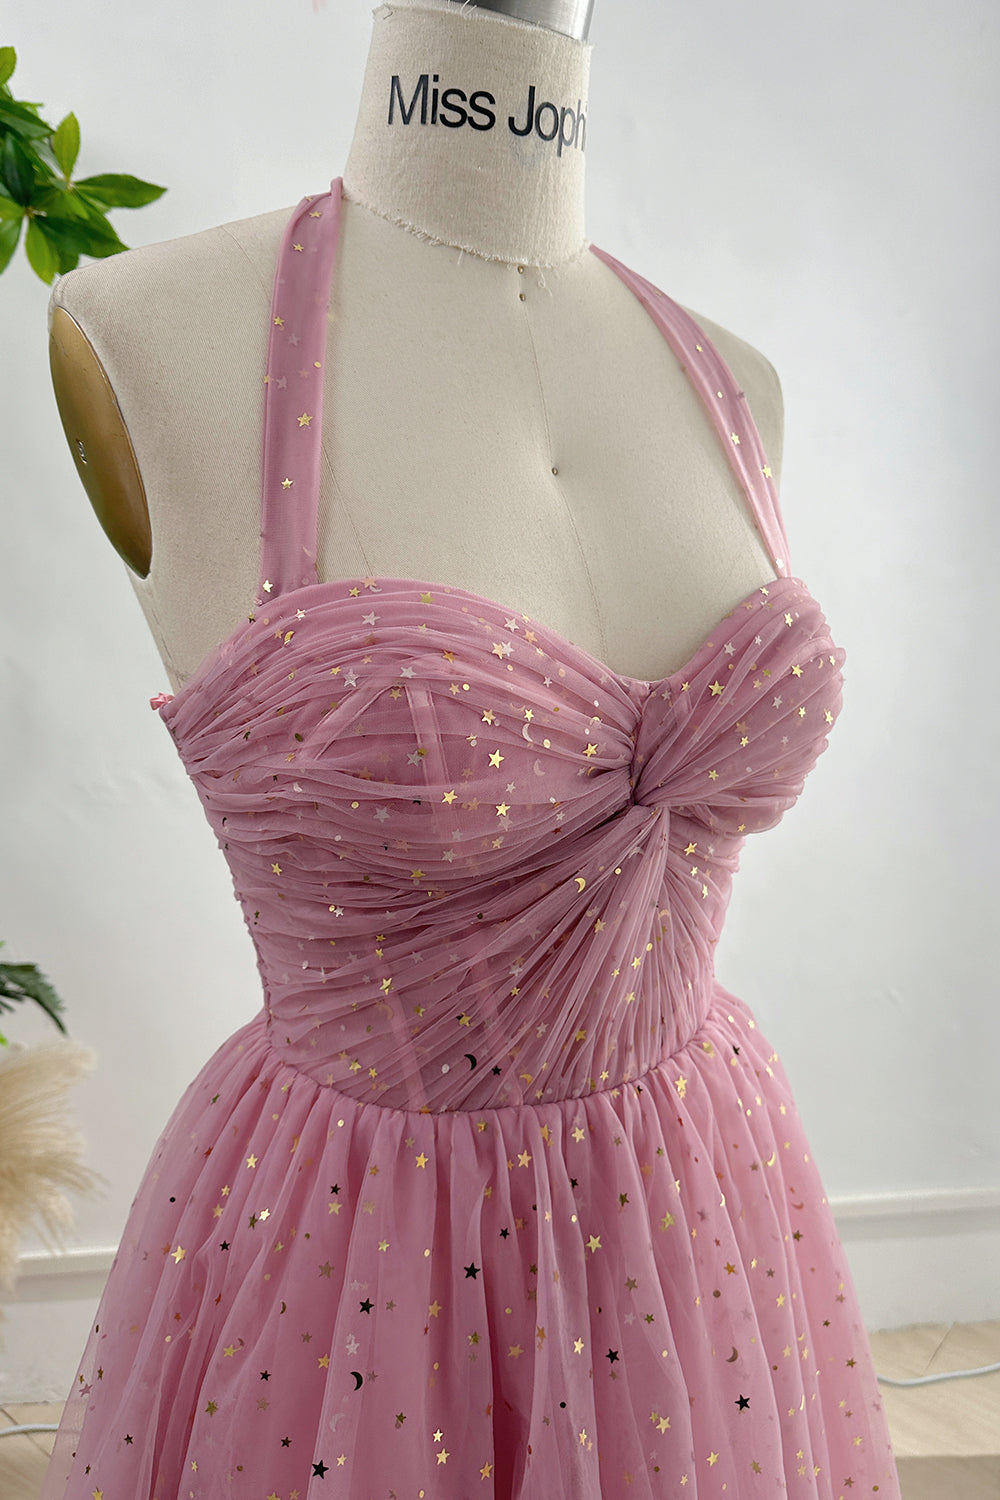 Sweetheart Corset Dusty Rose Dress with Removable Tie Straps